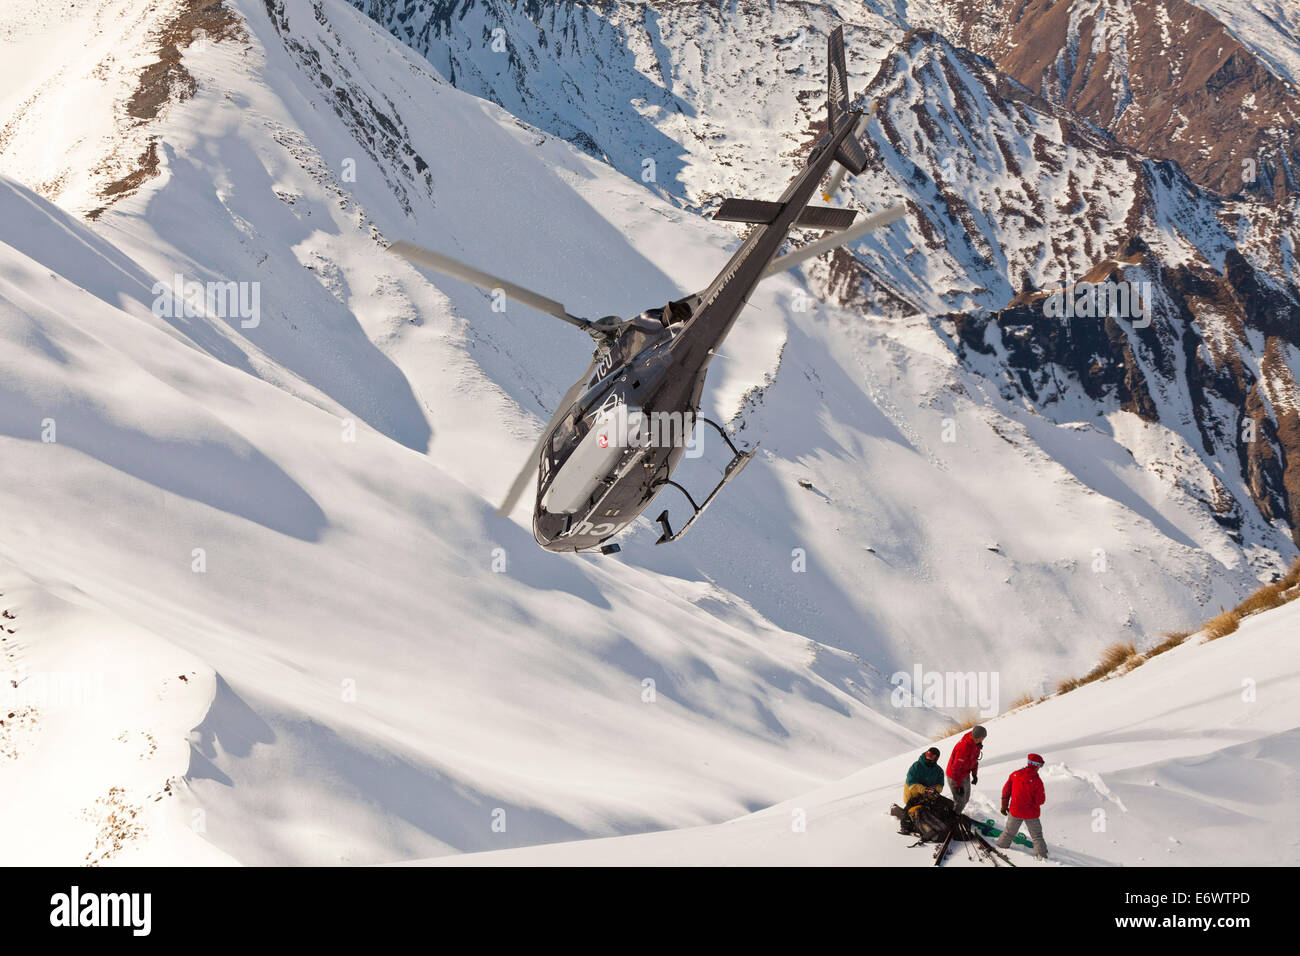 Helicopter landing with winter sportsmen, Skiers and snowboarders, South Island, New Zealand Stock Photo